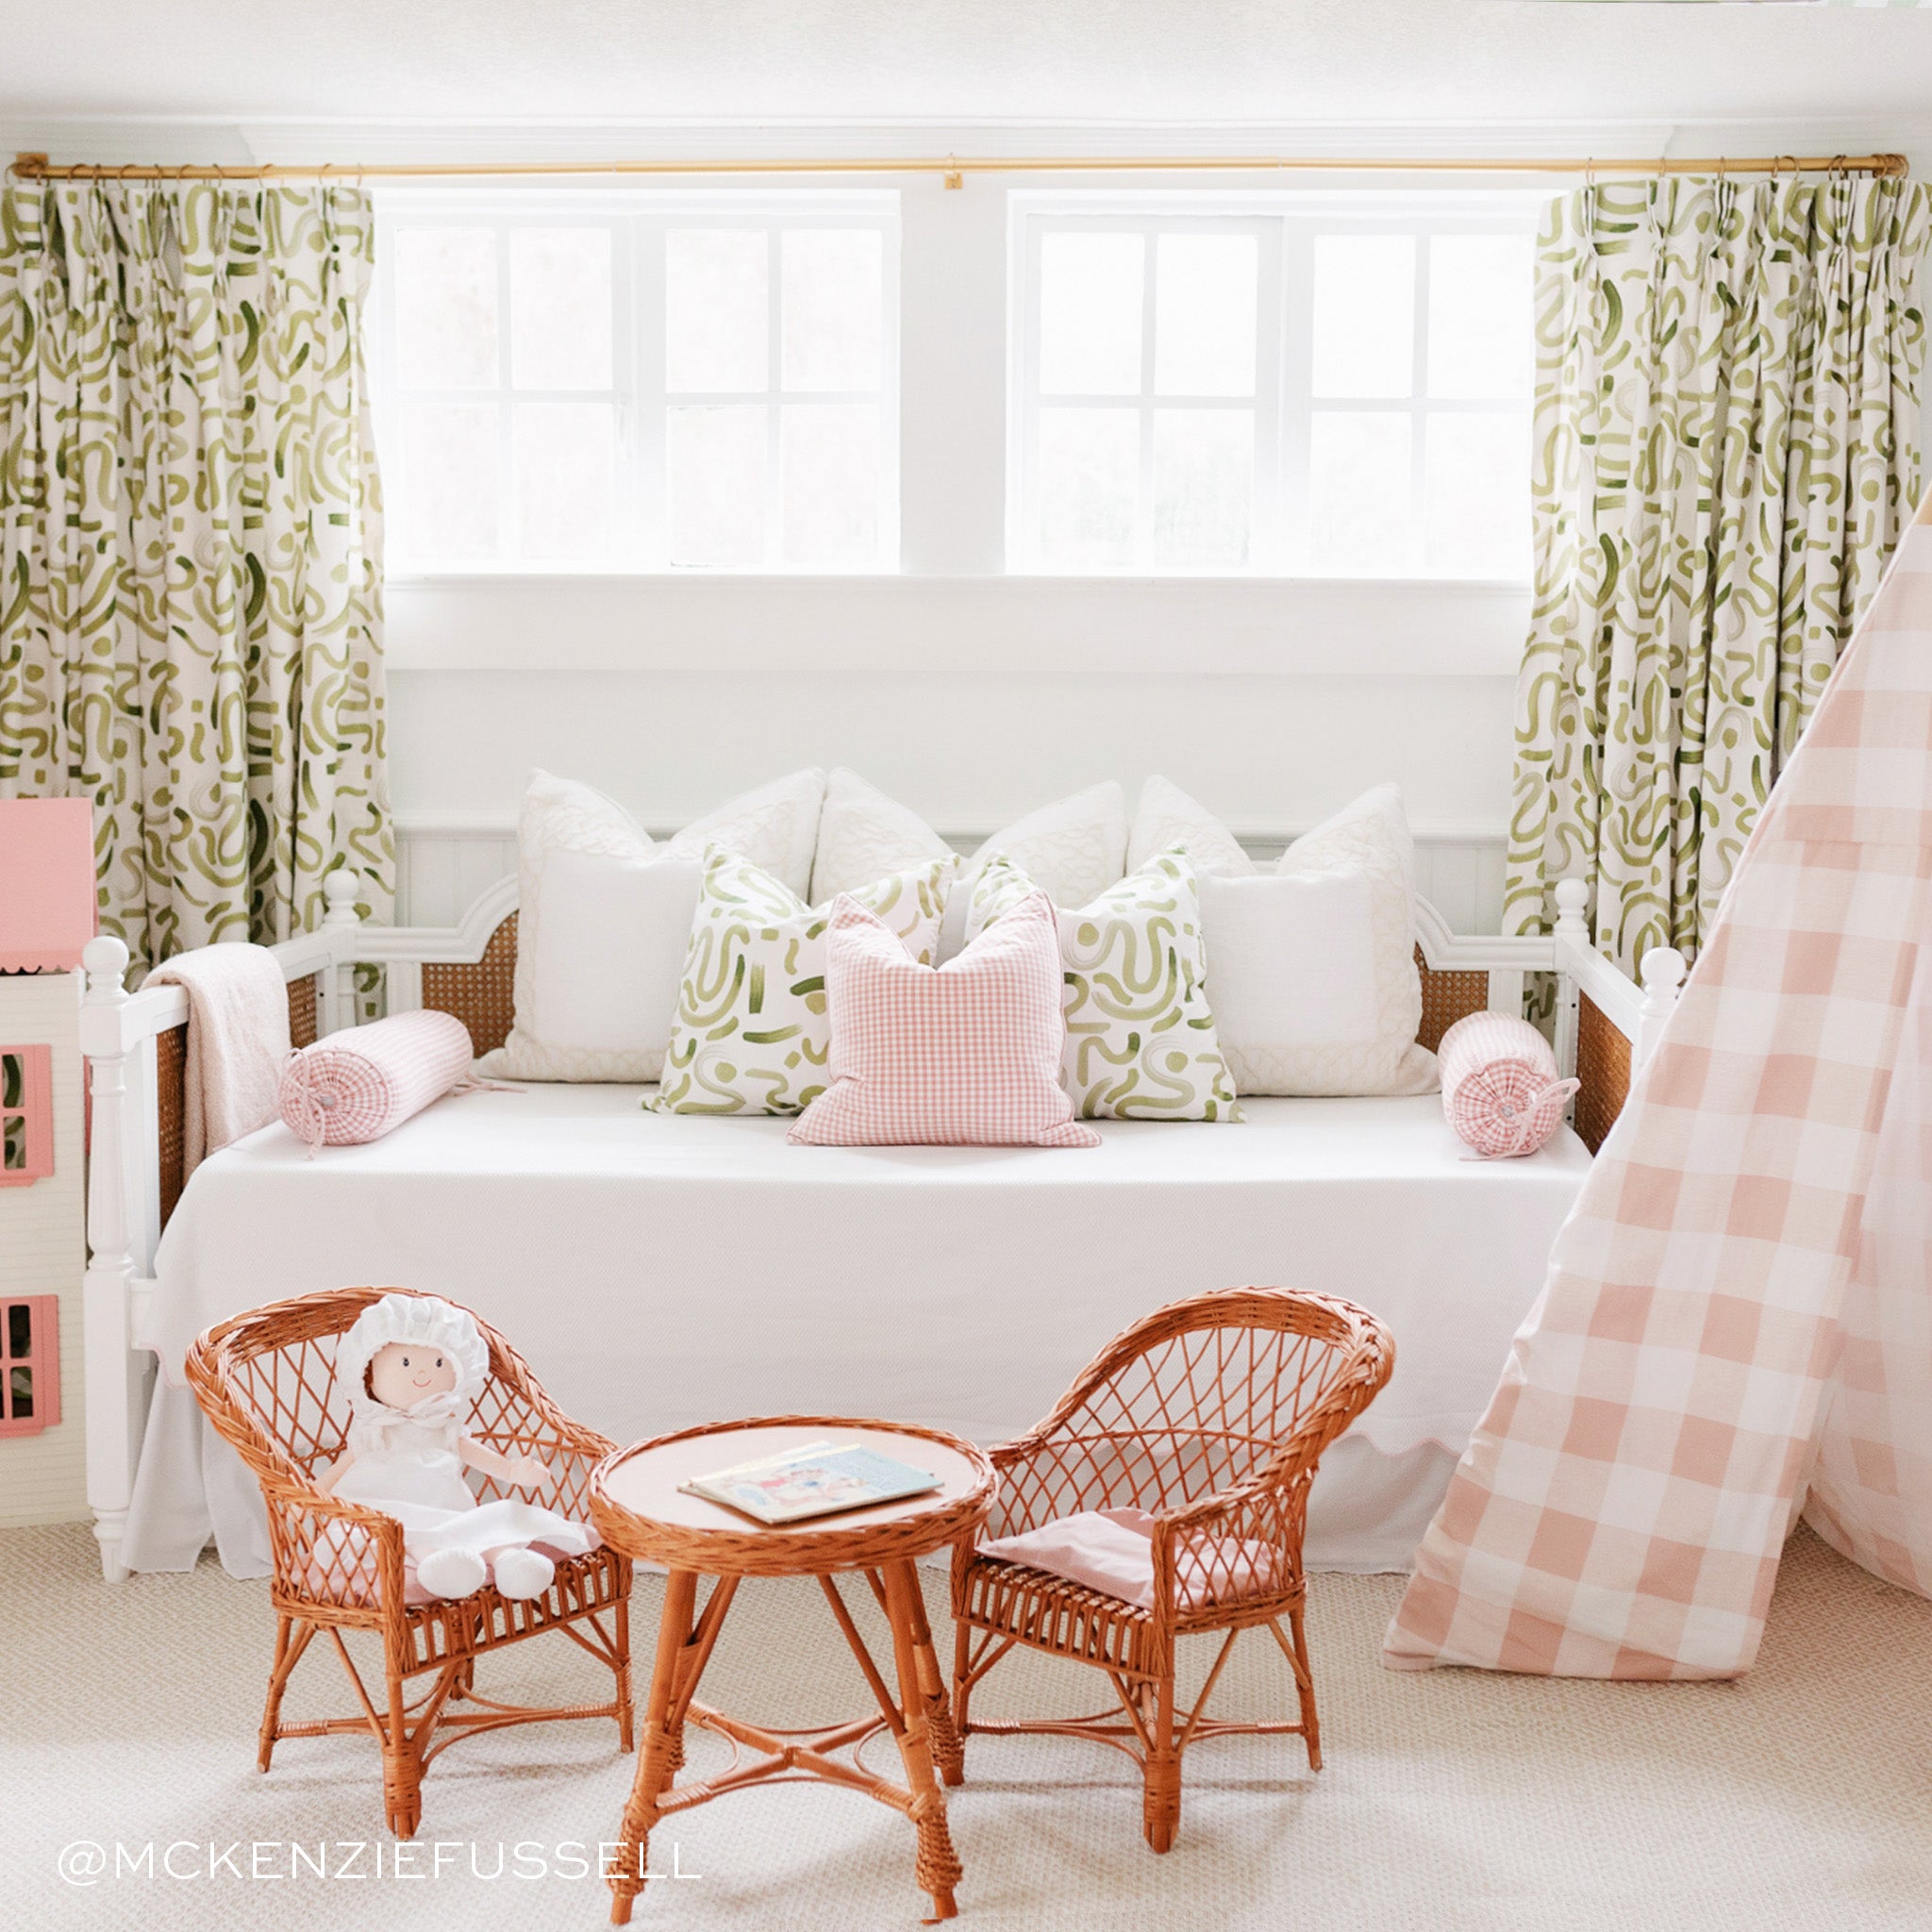 Kid's bedroom styled with Moss Green Printed Pillows on white bed by kid's brown table with two chairs and Moss Green Printed Curtains in the back by illuminated window. Photo by Mckenzie Fussell